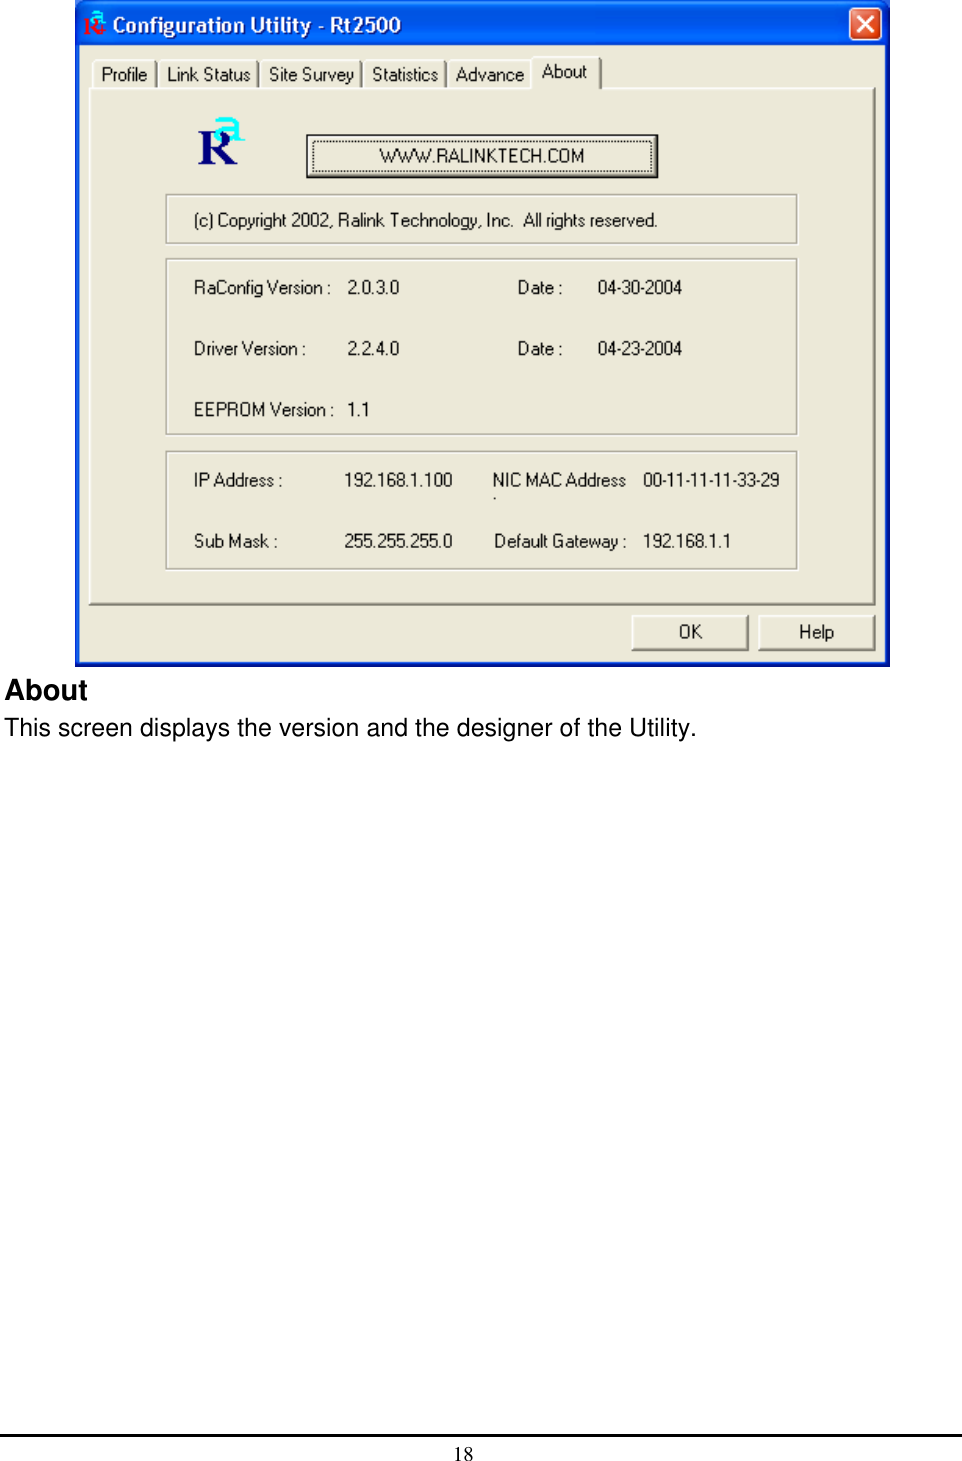   About This screen displays the version and the designer of the Utility.    18  